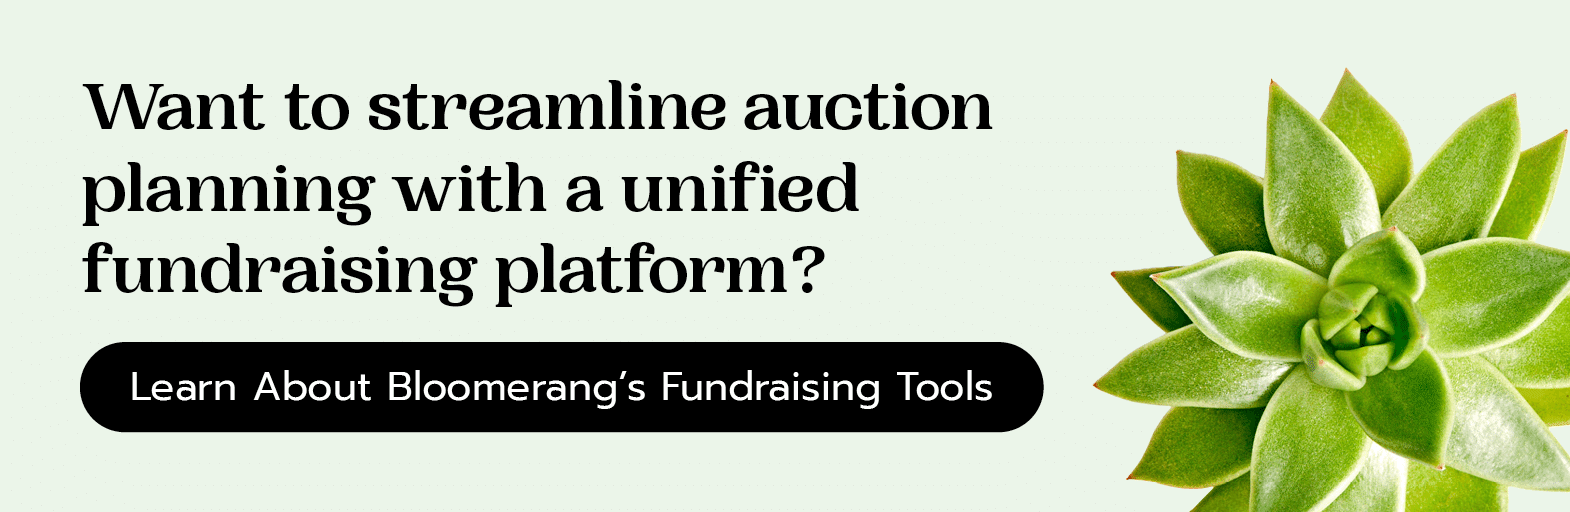 Want to streamline auction planning with a unified fundraising platform? Learn about Bloomerang’s fundraising tools. 